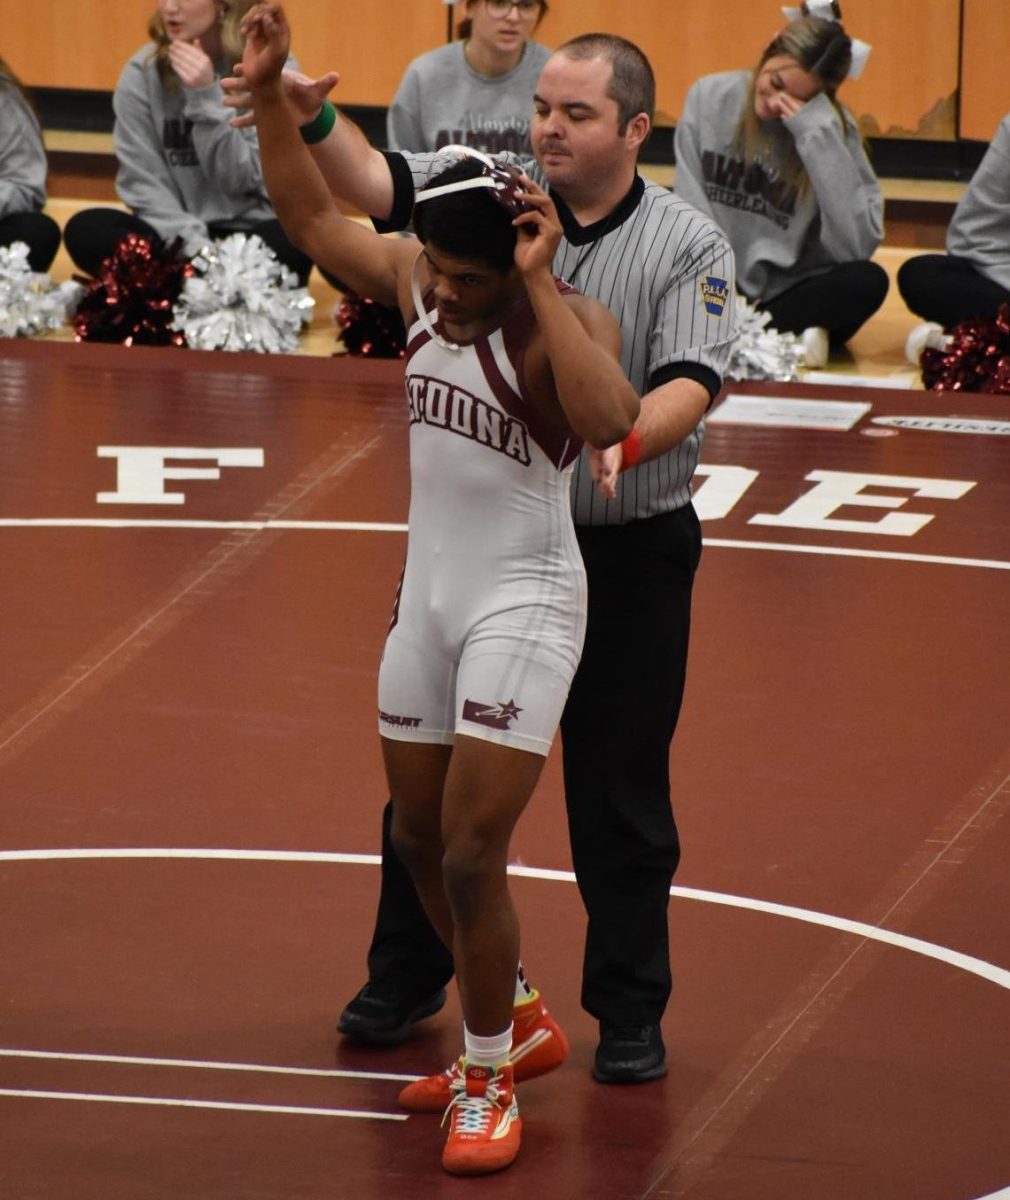 Winning+for+a+Reason.+sophomore+Ty-Kear+Davis+gets+his+hand+raised+after+winning+his+match+4-0.+Davis+has+wrestled+varsity+the+whole+year+and+has+a+record+of+8-14.